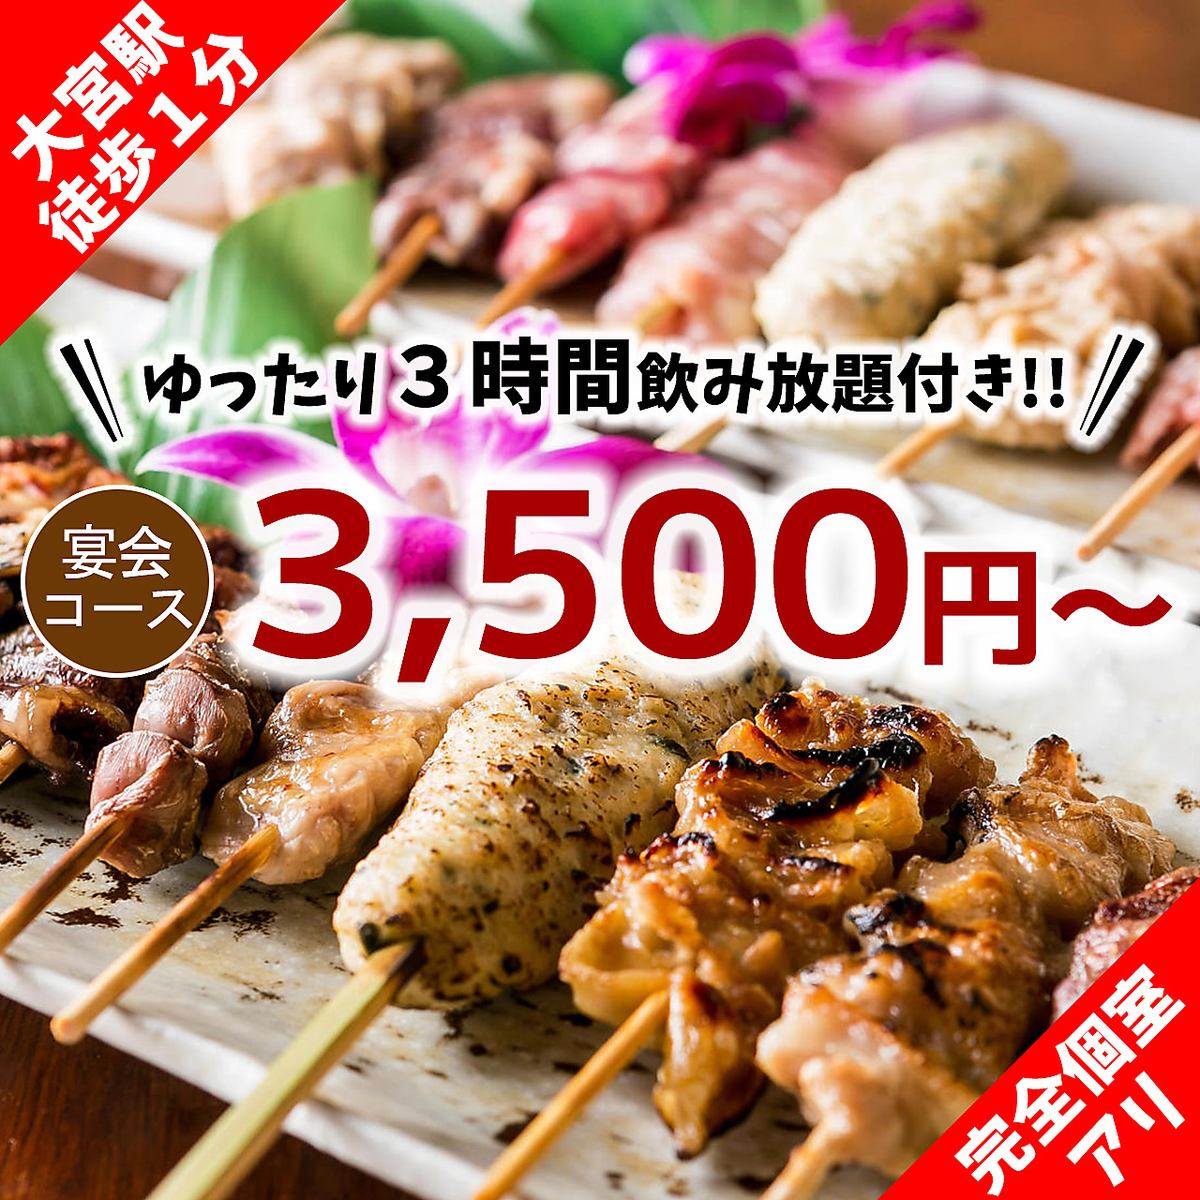 Relaxing 3H all-you-can-drink banquet from 3500 yen! 2.5H system on weekends ♪